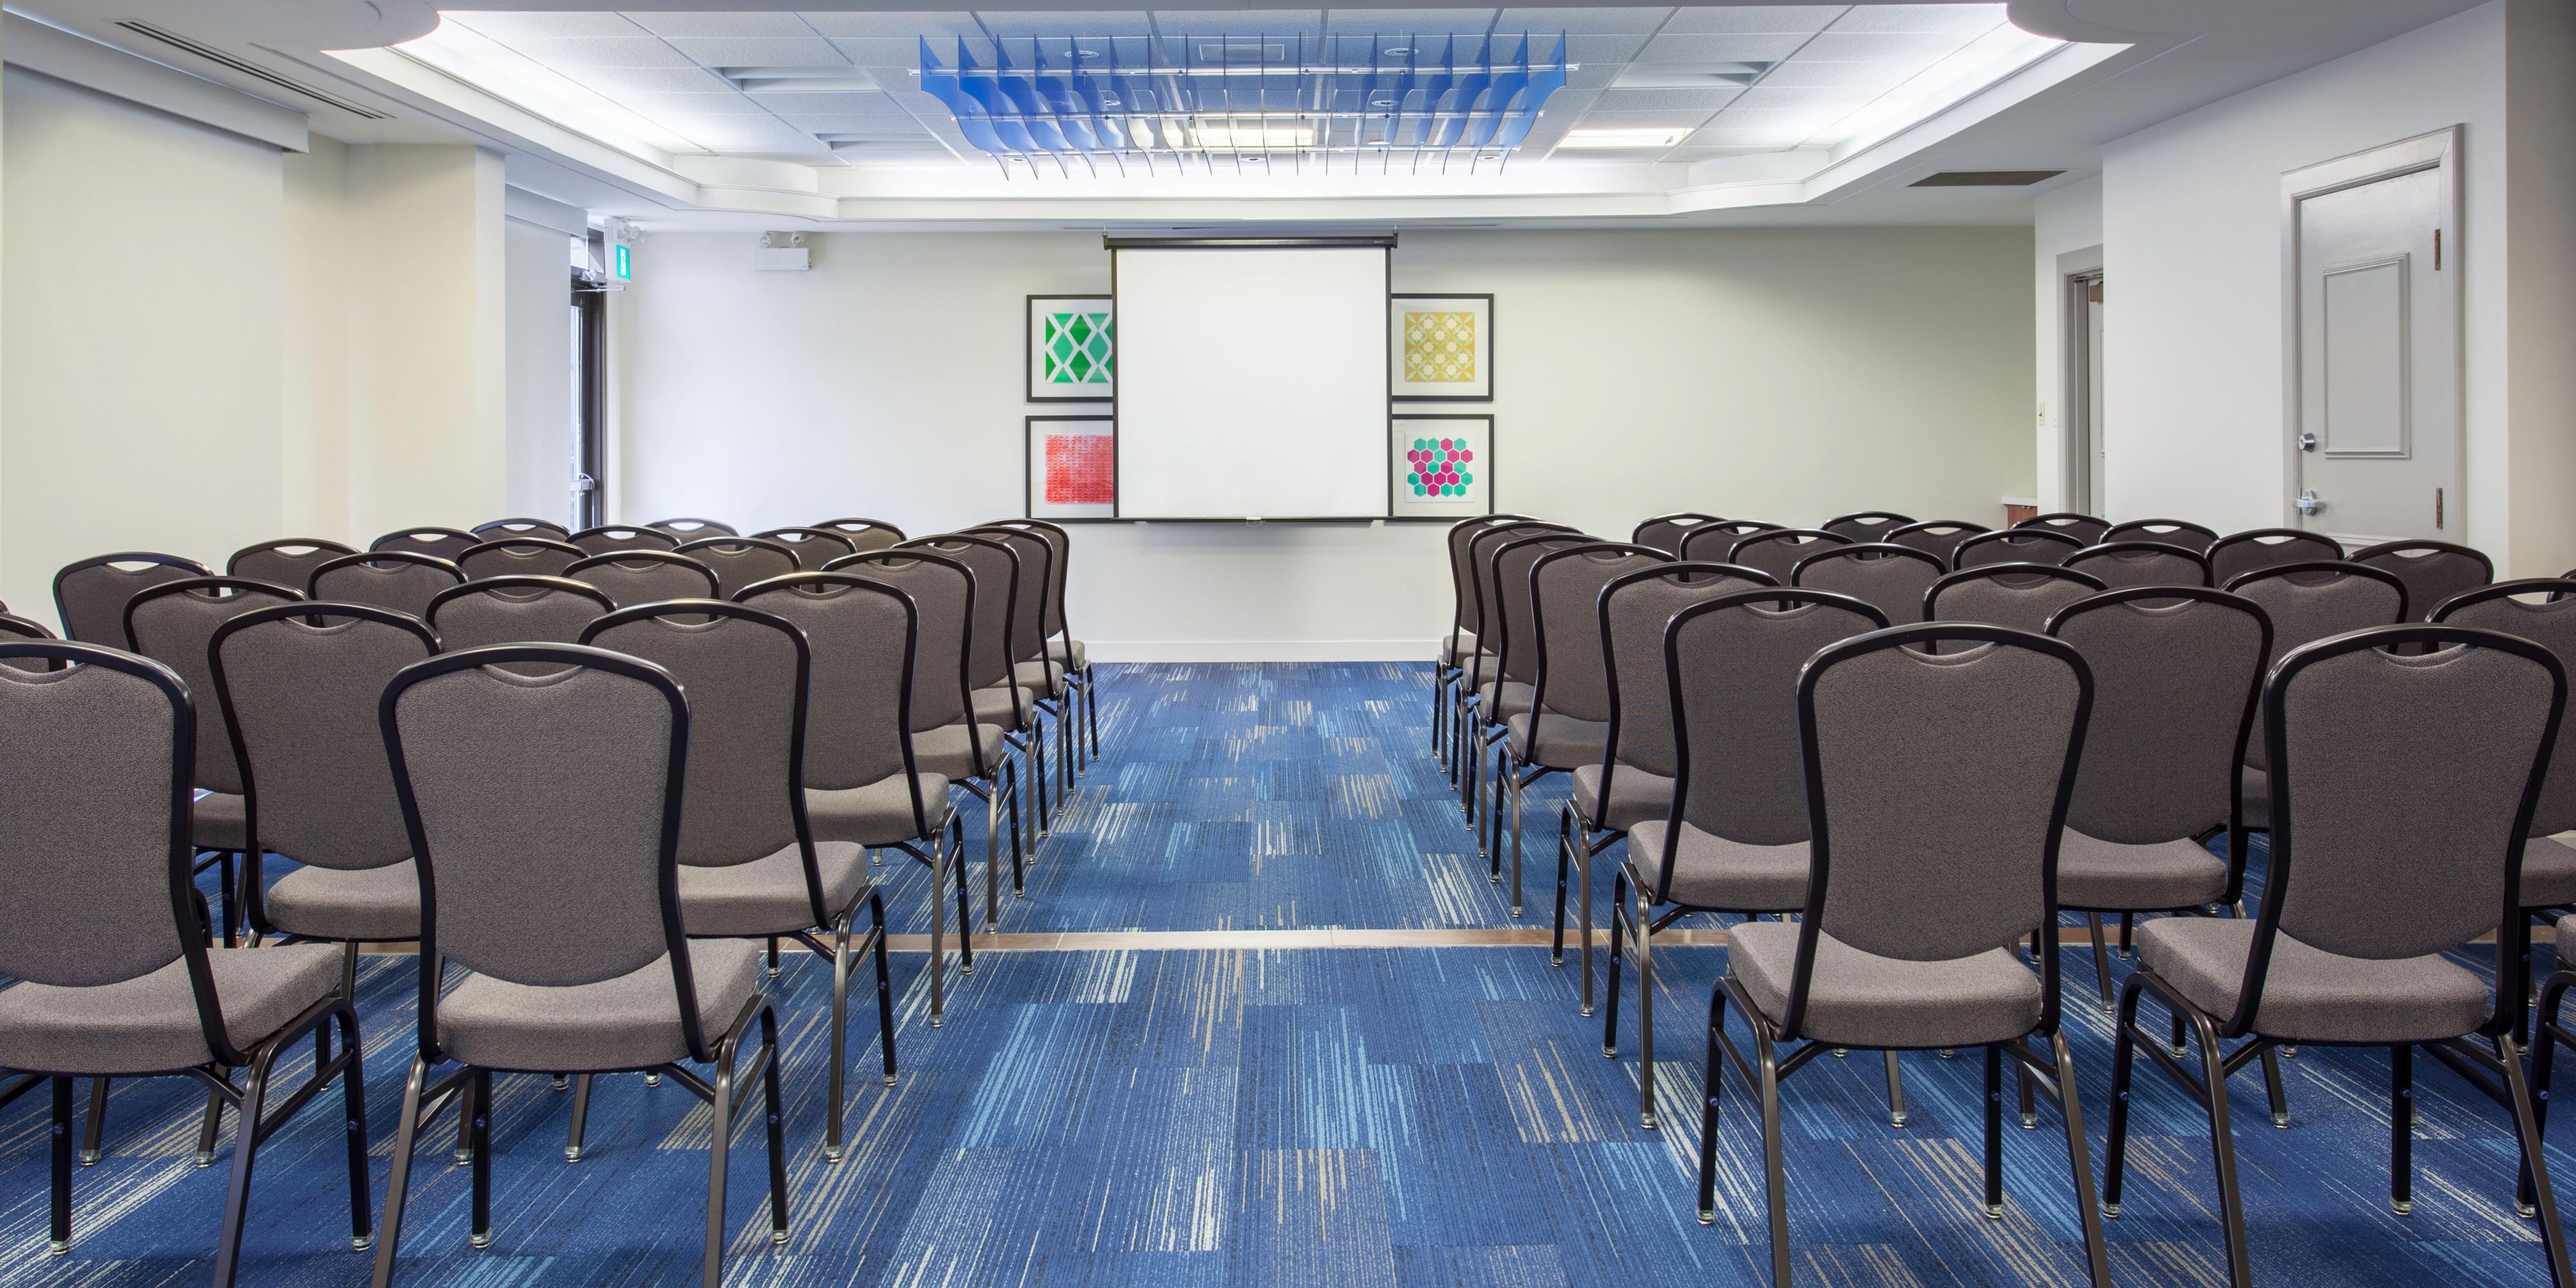 Our meeting facilities feature natural light, flexible set-up and dedicated climate control.  We offer cost-effective meeting packages and dedicated event planning staff to help you meet your most important meeting objectives.  